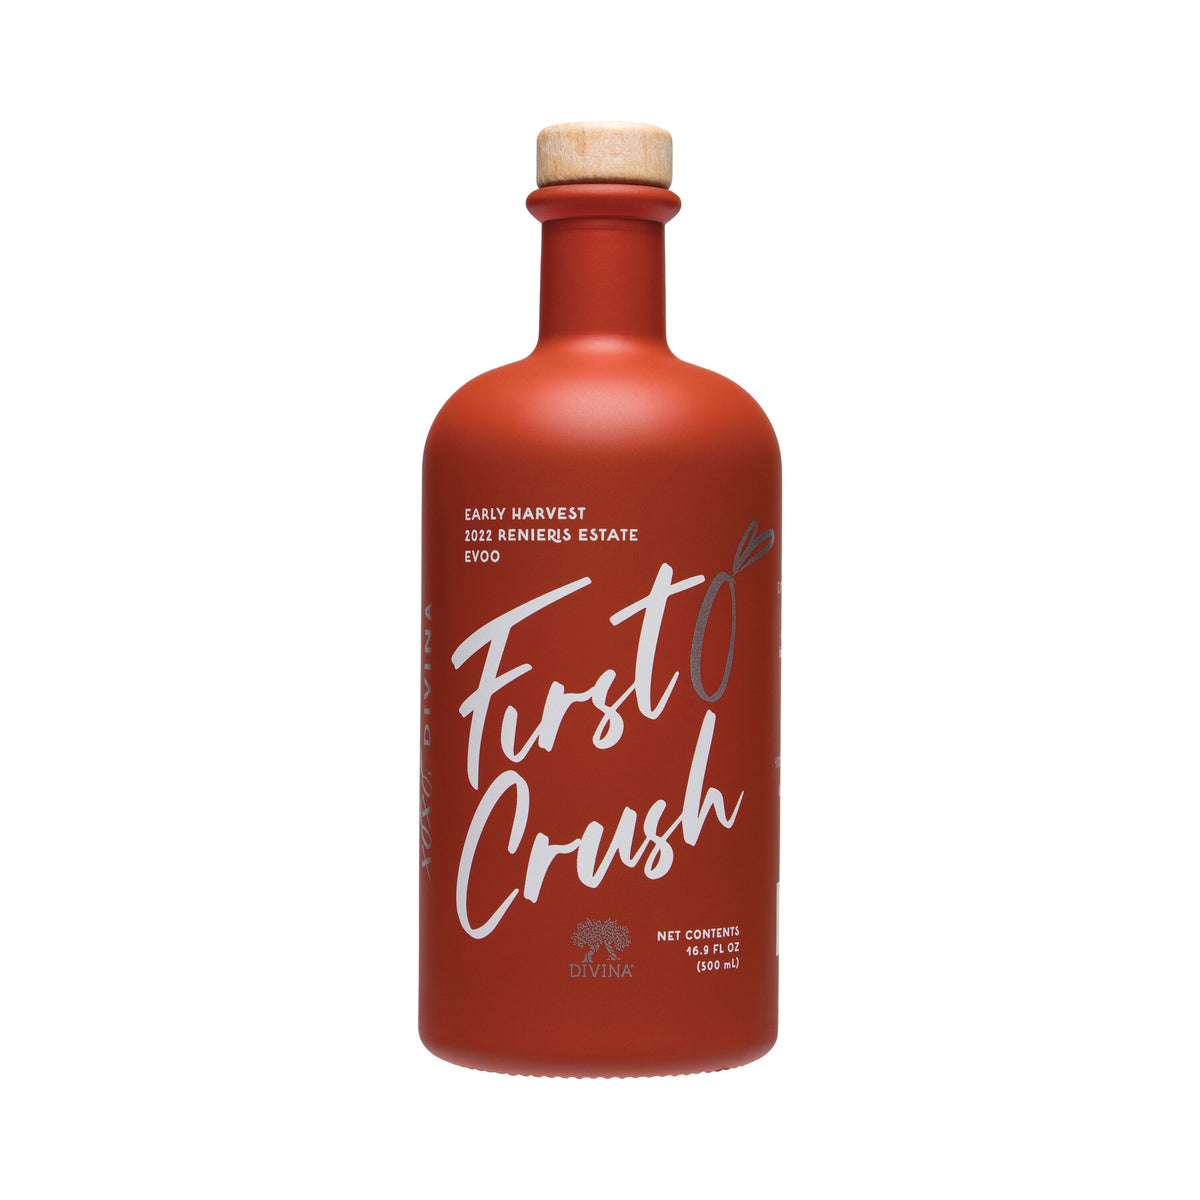 2022 First Crush Extra Virgin Olive Oil